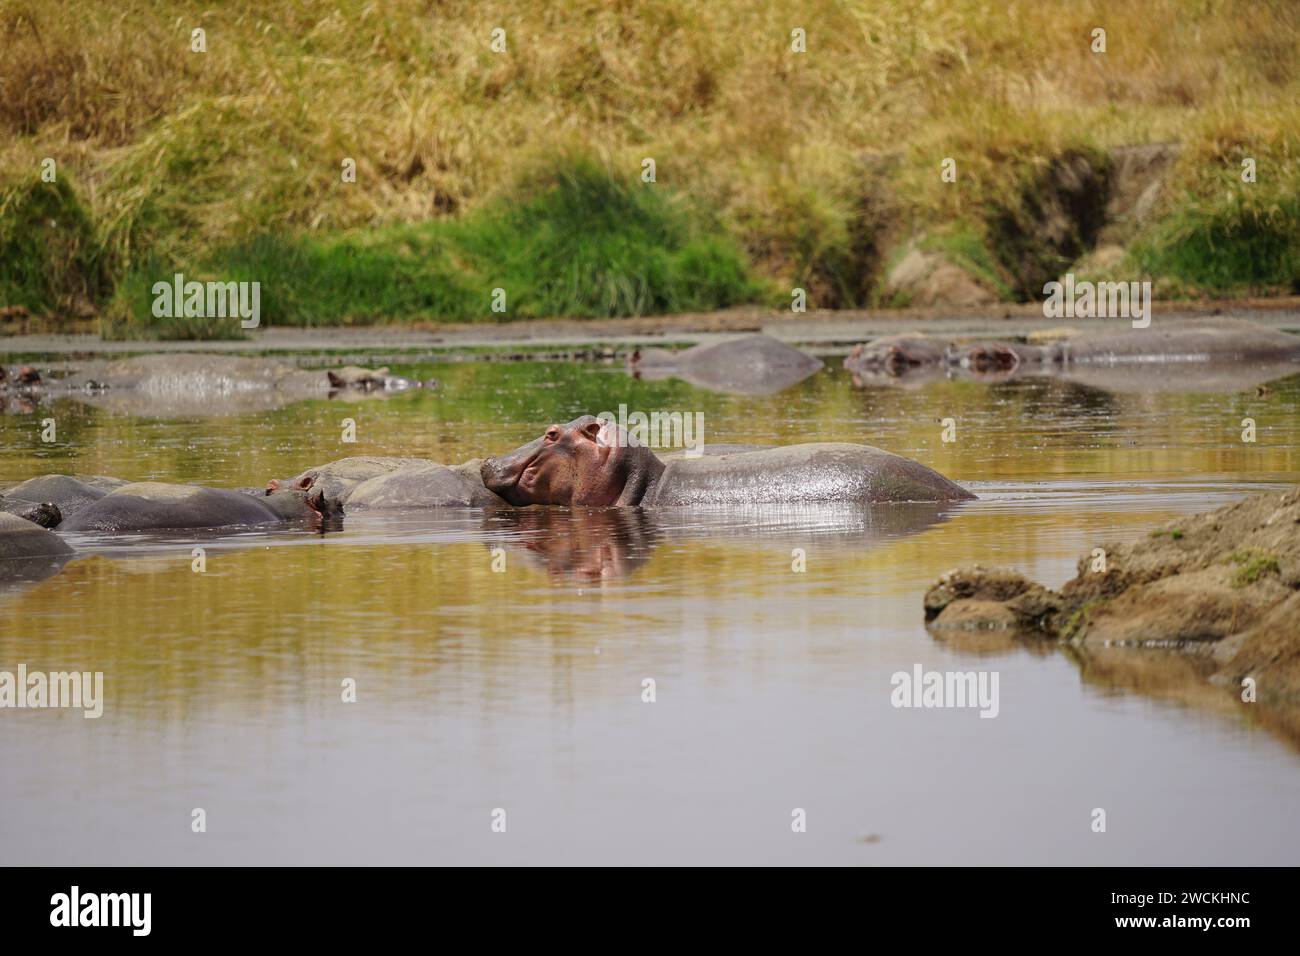 hippos in pond, african wilderness, water, grass Stock Photo